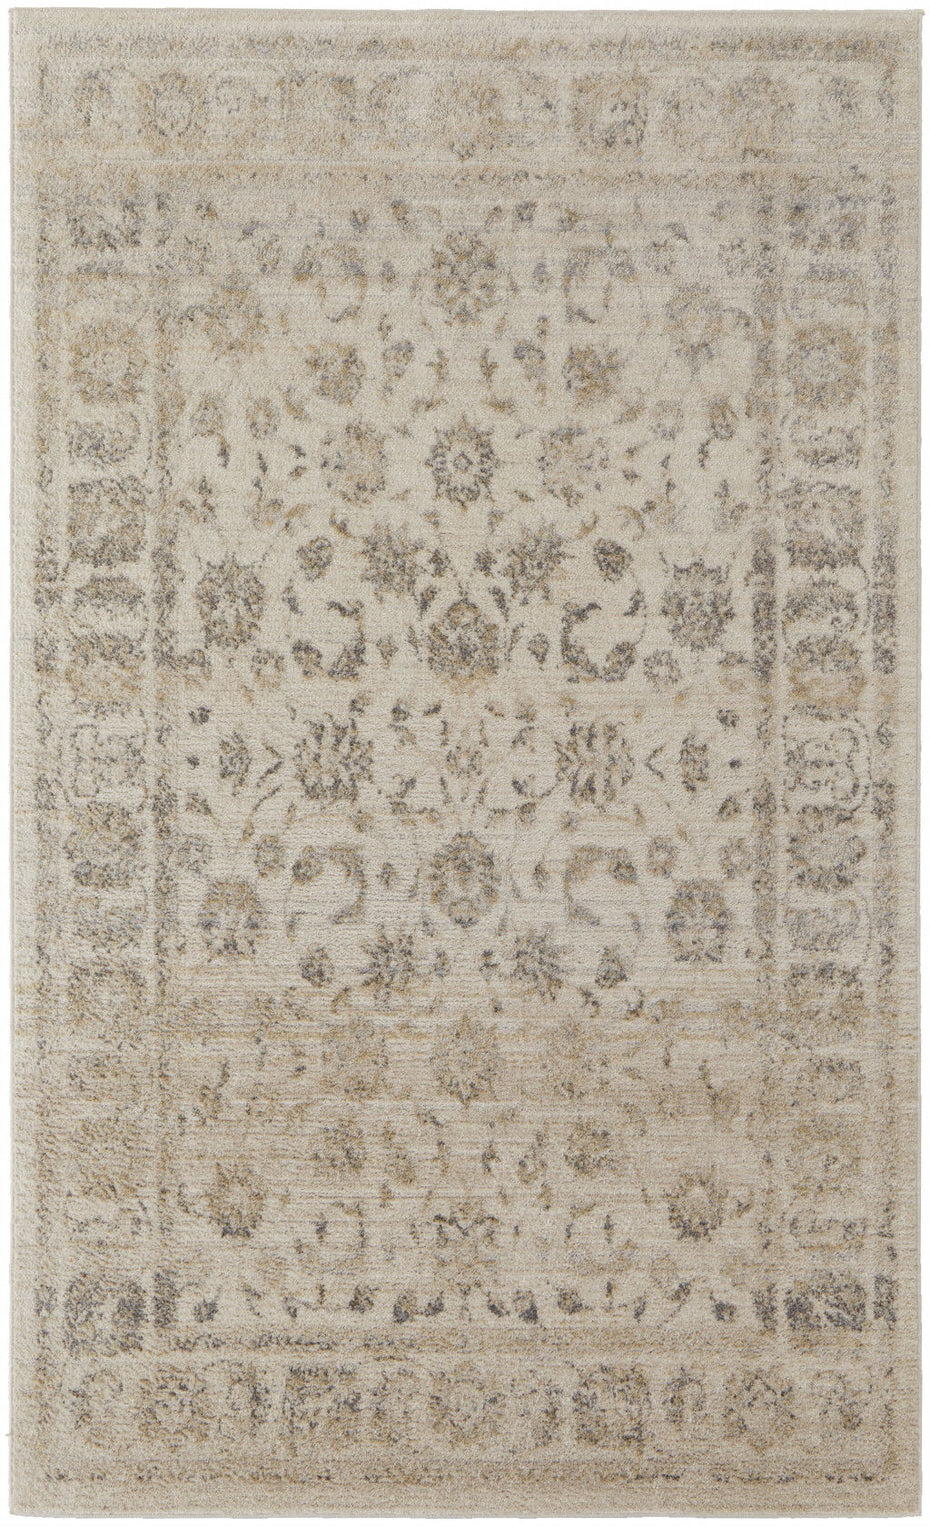 Abstract Power Loom Distressed Area Rug - Ivory Beige And Gray - 8' X 10'